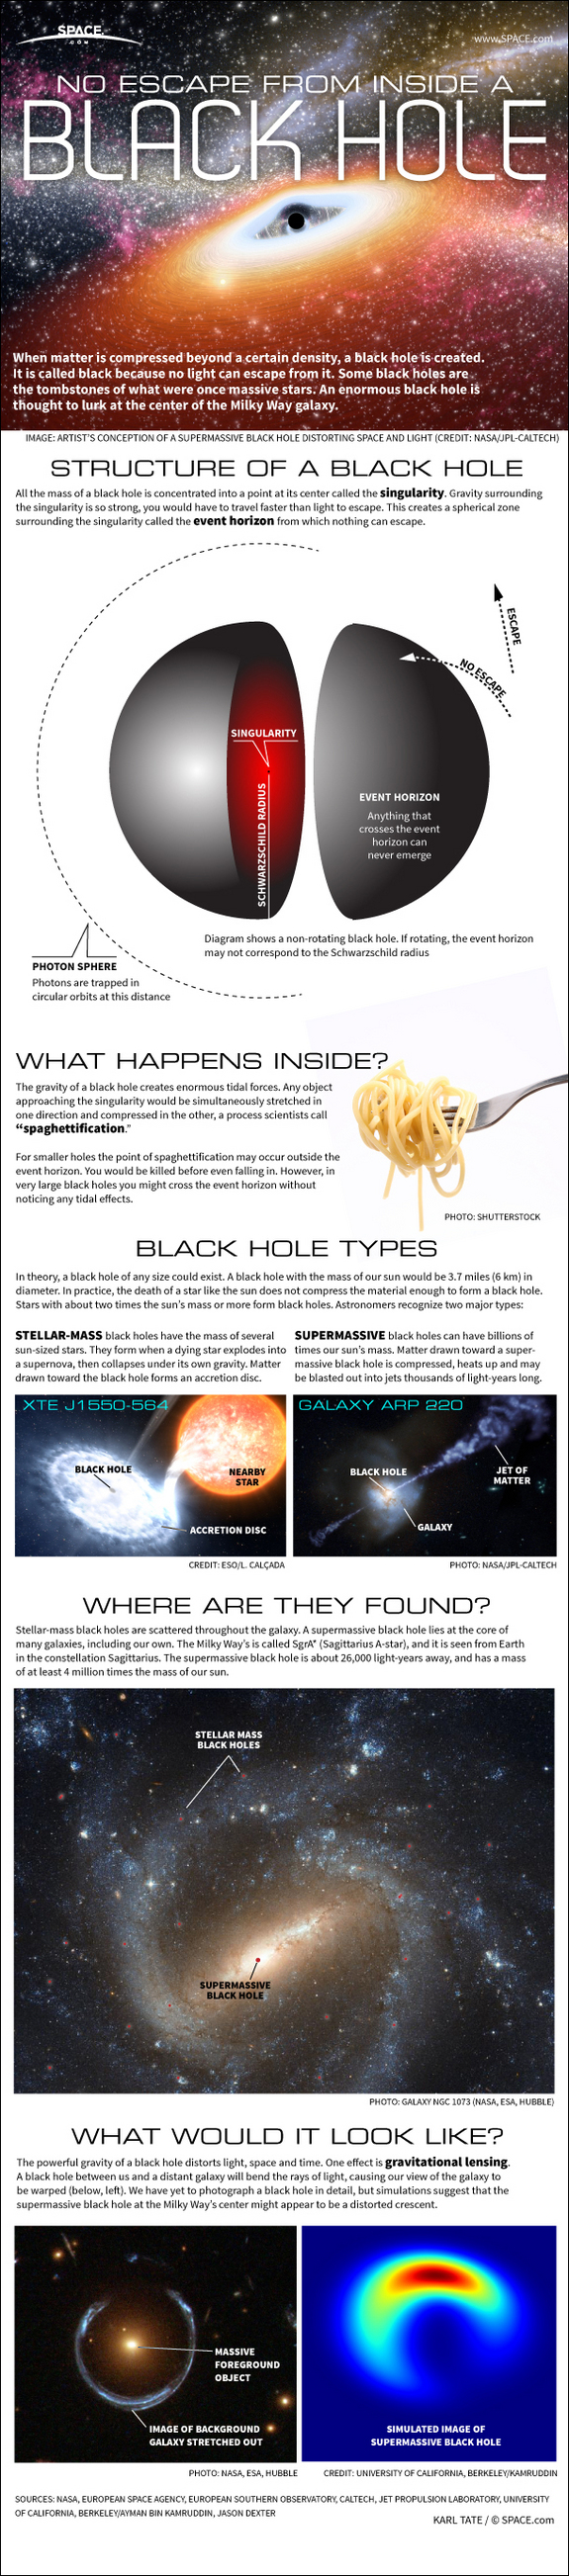 Find out about black holes, strange objects that warp spacetime and bend light, in this SPACE.com infographic.